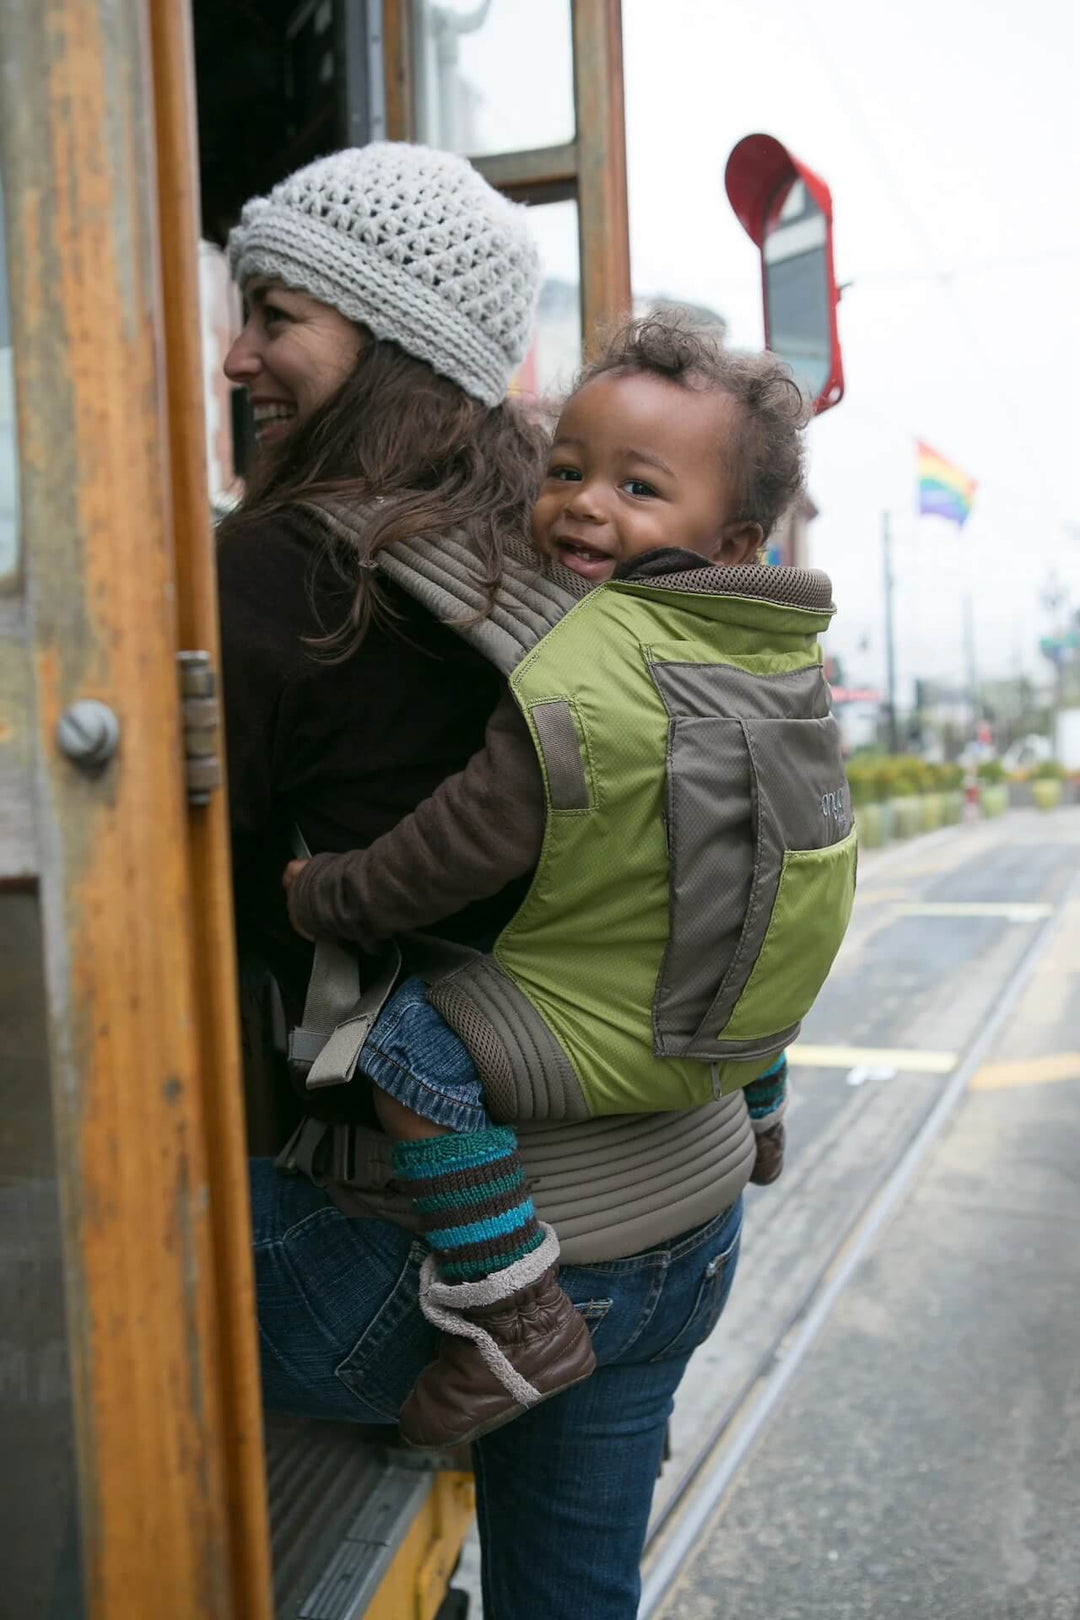 Woman boarding a bus with smiling baby in an Onya Baby Outback in the back carry position